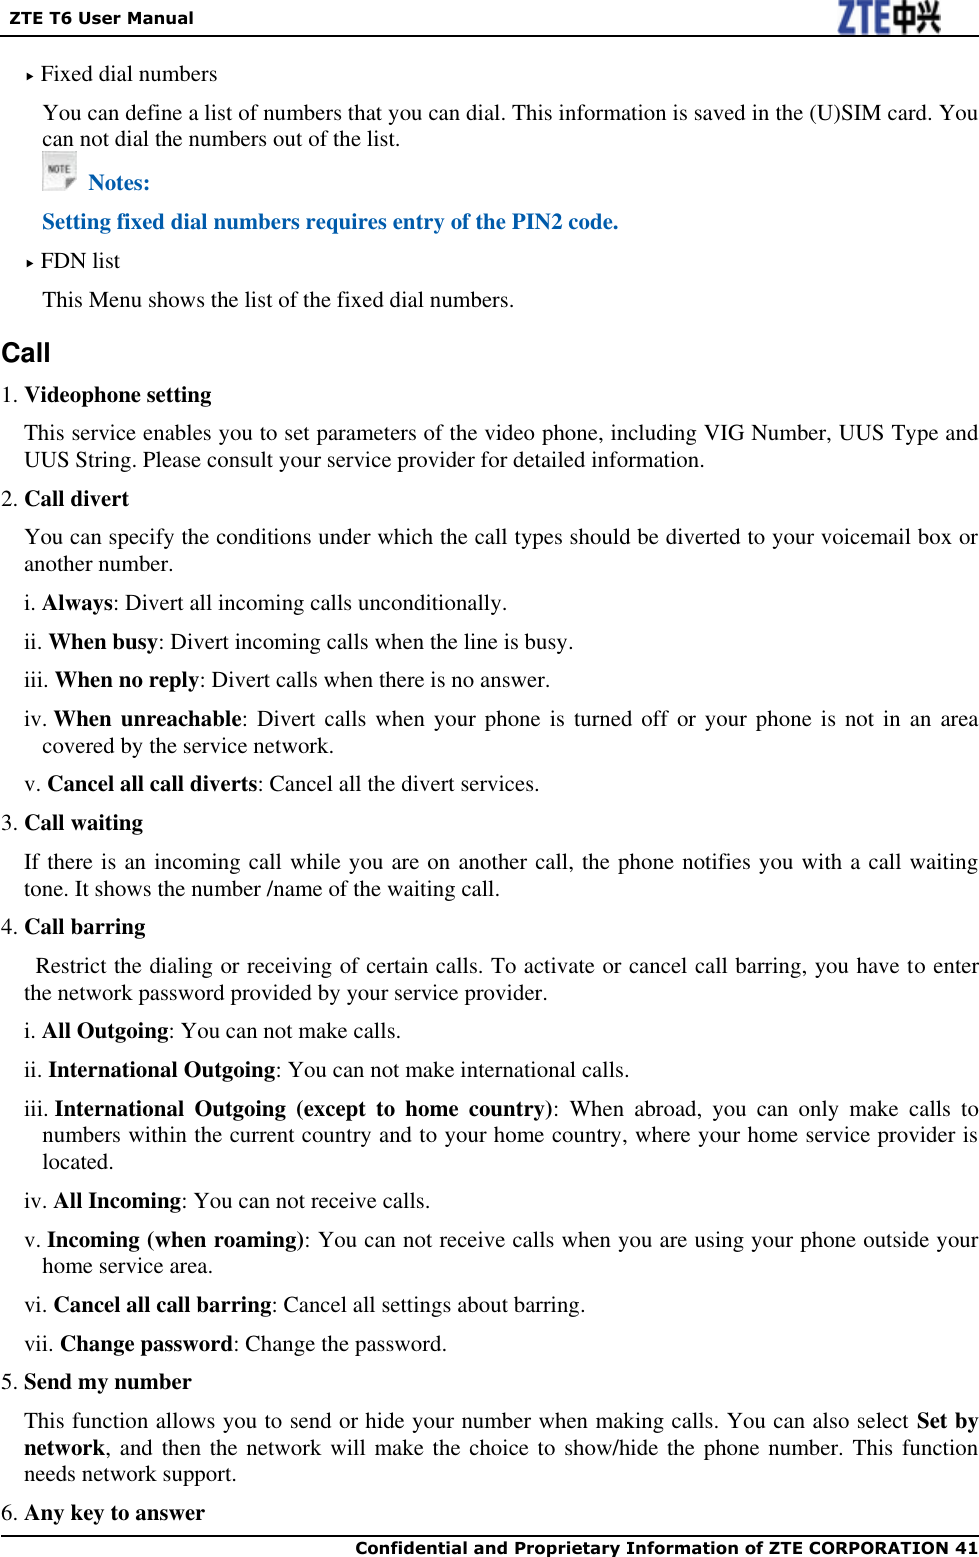   ZTE T6 User Manual  Confidential and Proprietary Information of ZTE CORPORATION 41    Fixed dial numbers You can define a list of numbers that you can dial. This information is saved in the (U)SIM card. You can not dial the numbers out of the list.   Notes: Setting fixed dial numbers requires entry of the PIN2 code.  FDN list This Menu shows the list of the fixed dial numbers. Call 1. Videophone setting This service enables you to set parameters of the video phone, including VIG Number, UUS Type and UUS String. Please consult your service provider for detailed information. 2. Call divert You can specify the conditions under which the call types should be diverted to your voicemail box or another number. i. Always: Divert all incoming calls unconditionally. ii. When busy: Divert incoming calls when the line is busy. iii. When no reply: Divert calls when there is no answer. iv. When unreachable: Divert calls when  your phone is  turned off or  your  phone is not  in an  area covered by the service network. v. Cancel all call diverts: Cancel all the divert services. 3. Call waiting If there is an incoming call while you are on another call, the phone notifies you with a call waiting tone. It shows the number /name of the waiting call. 4. Call barring   Restrict the dialing or receiving of certain calls. To activate or cancel call barring, you have to enter the network password provided by your service provider. i. All Outgoing: You can not make calls. ii. International Outgoing: You can not make international calls. iii. International  Outgoing  (except  to  home  country):  When  abroad,  you  can  only  make  calls  to numbers within the current country and to your home country, where your home service provider is located. iv. All Incoming: You can not receive calls. v. Incoming (when roaming): You can not receive calls when you are using your phone outside your home service area. vi. Cancel all call barring: Cancel all settings about barring. vii. Change password: Change the password. 5. Send my number This function allows you to send or hide your number when making calls. You can also select Set by network, and then the network will make the  choice to show/hide the phone number. This function needs network support. 6. Any key to answer 